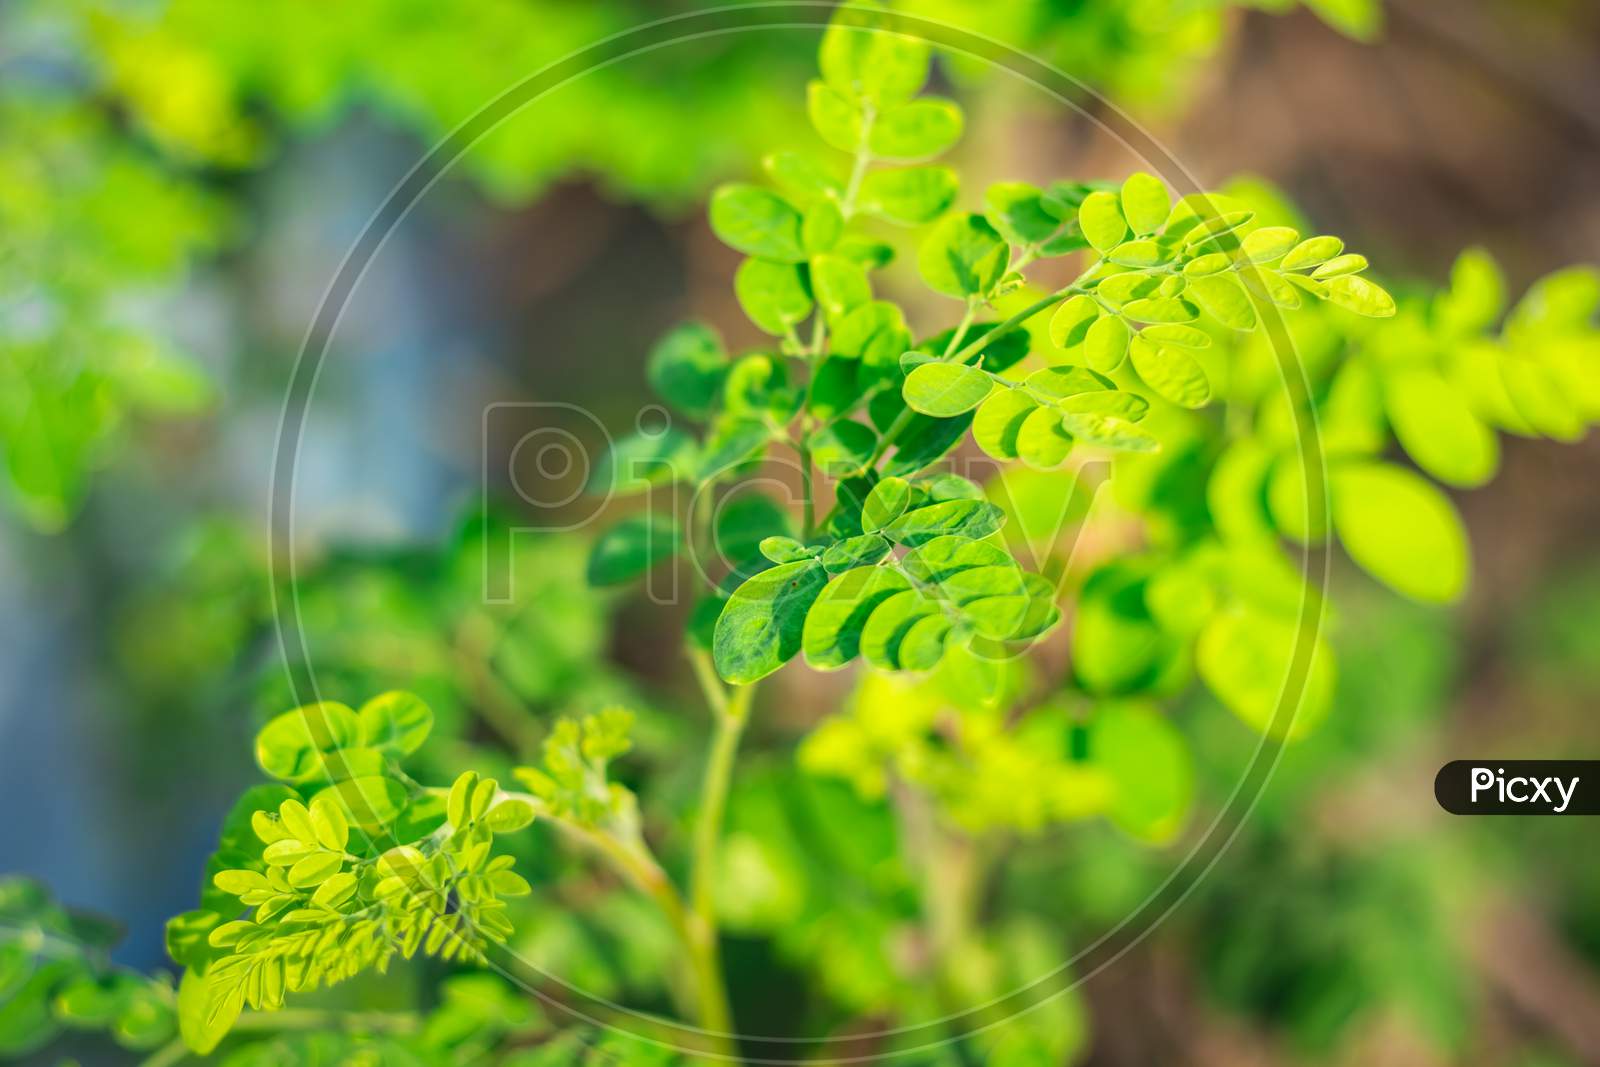 Drum Stick Leafs. Moringa Leaves / Drumstick Spinach. Moringa Oleifera Drum Stick Tree Leaf. Moringa Oleifera Known As The Drum Stick Tree Is An Amazing Tree, Its Can Be Used As Food Or Medicine,